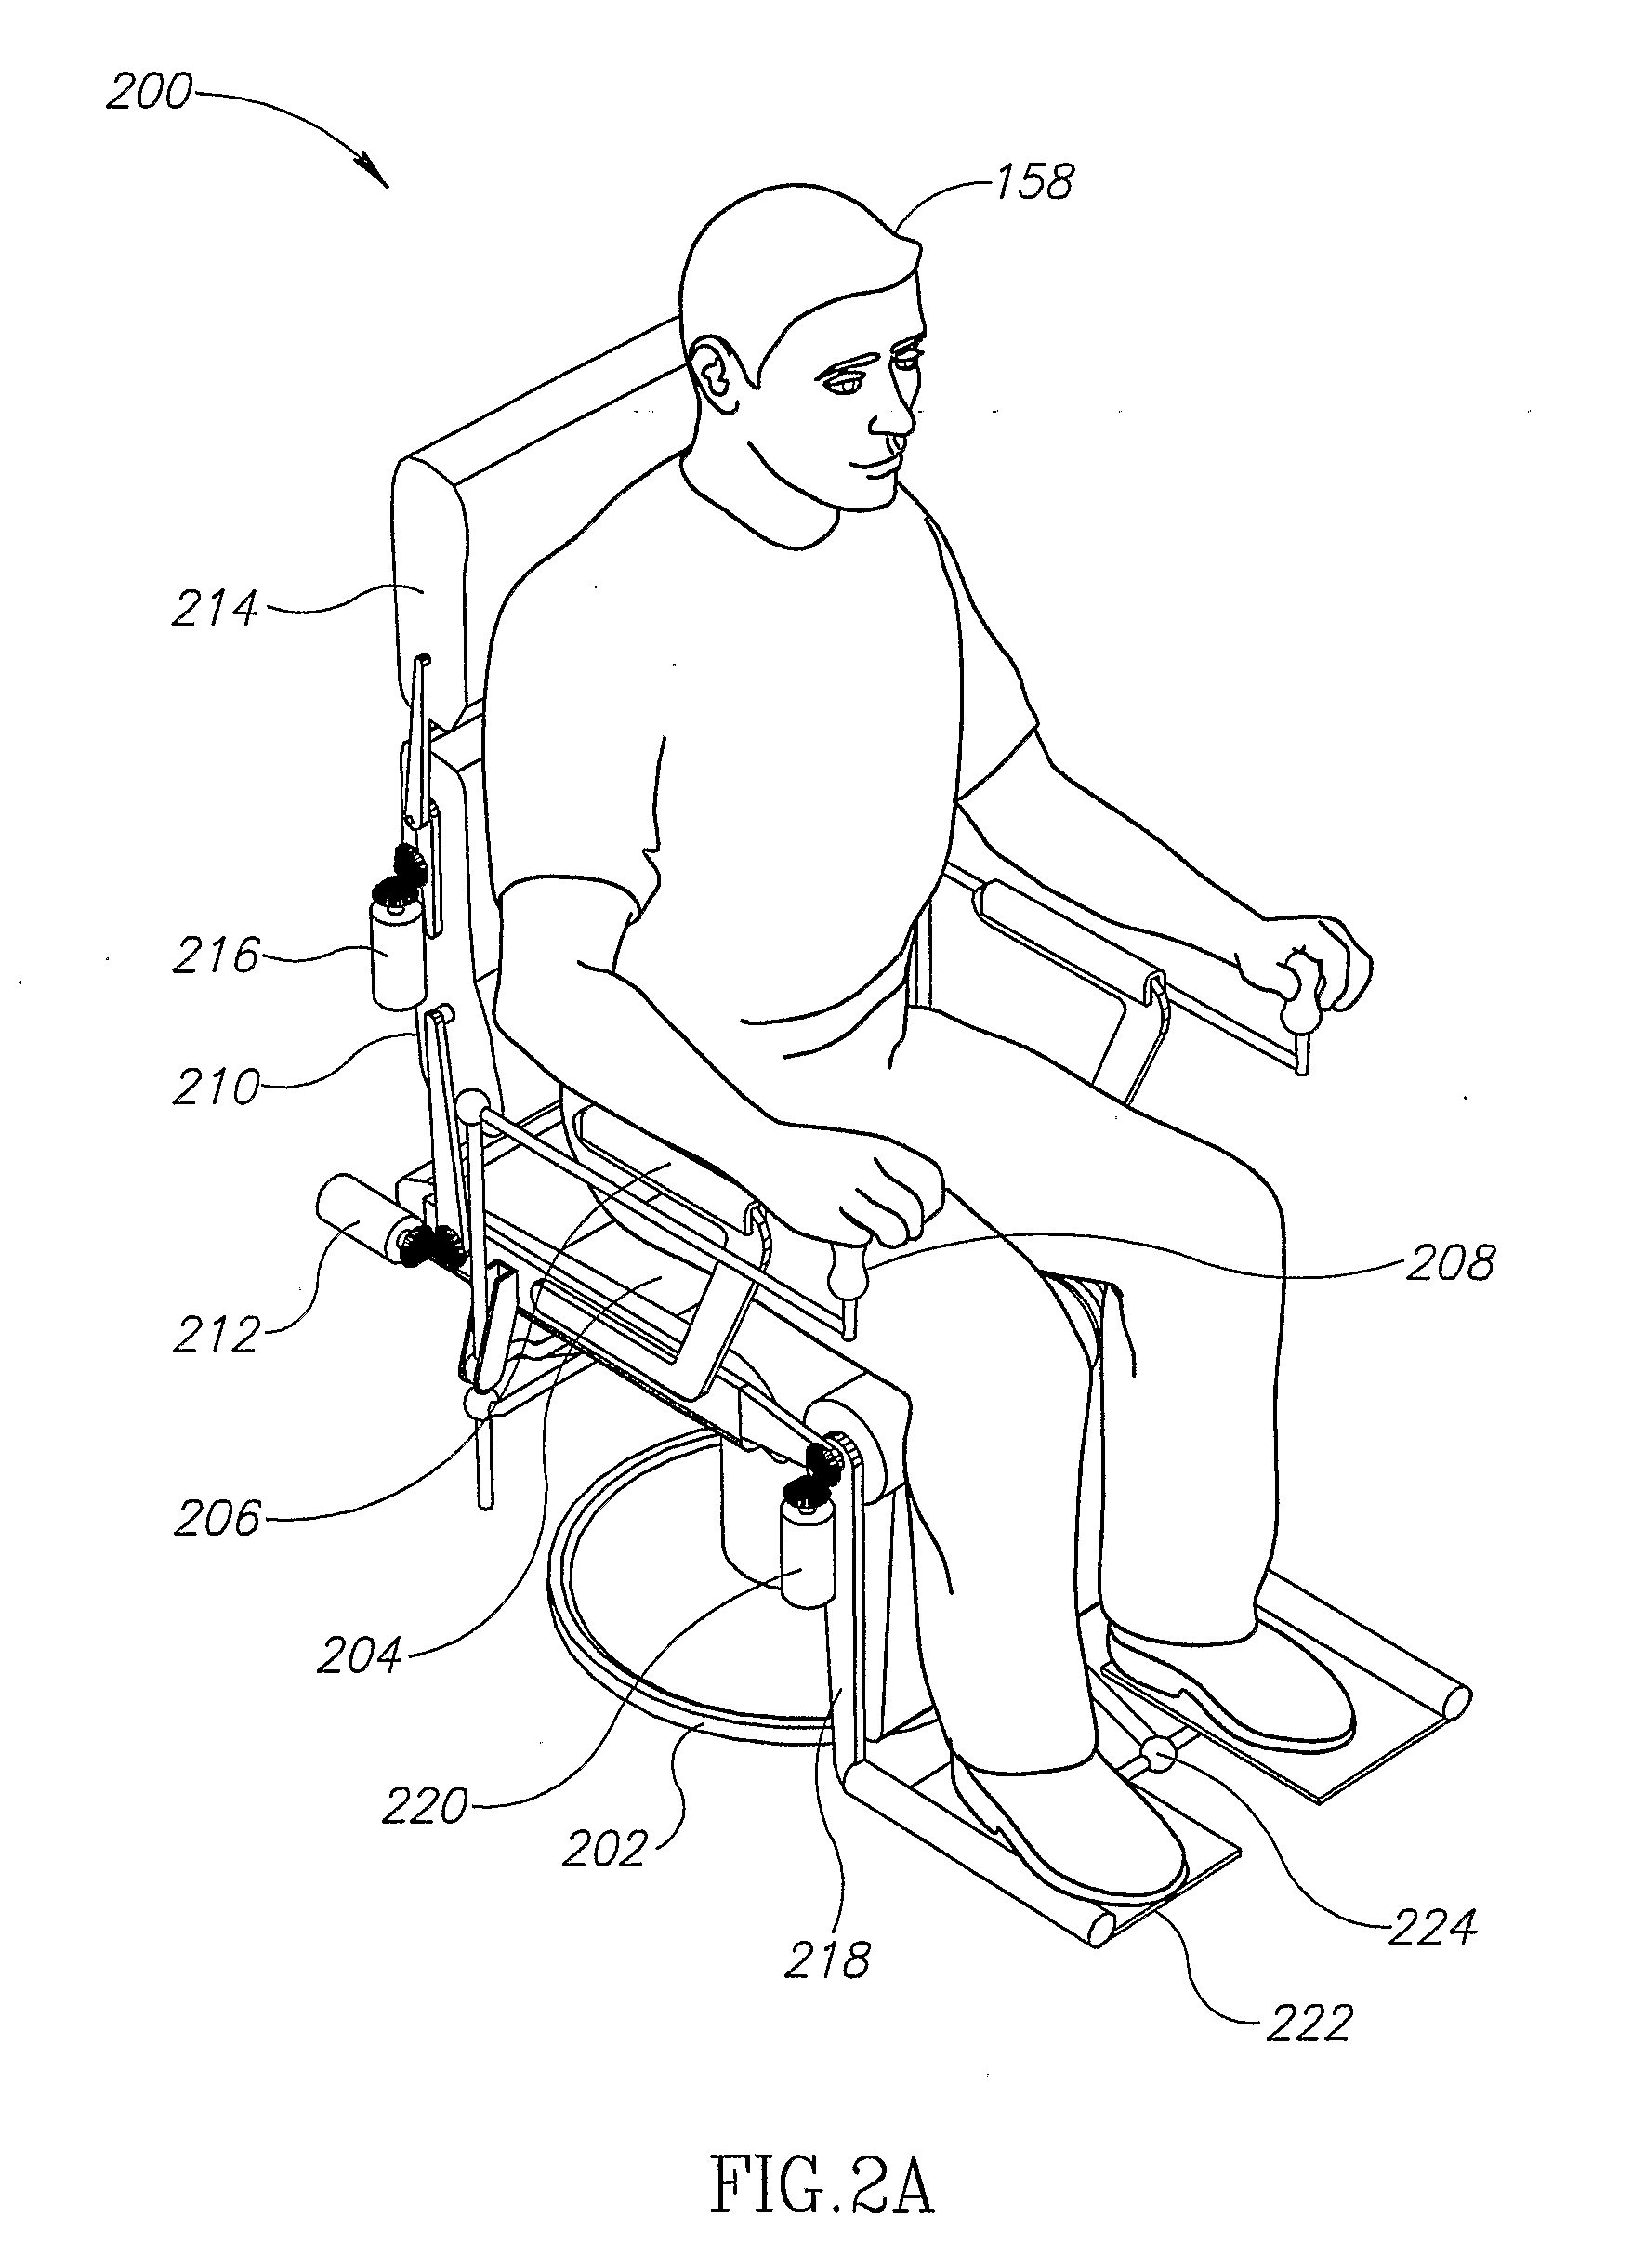 Device And Method For Training, Rehabilitation And/Or Support